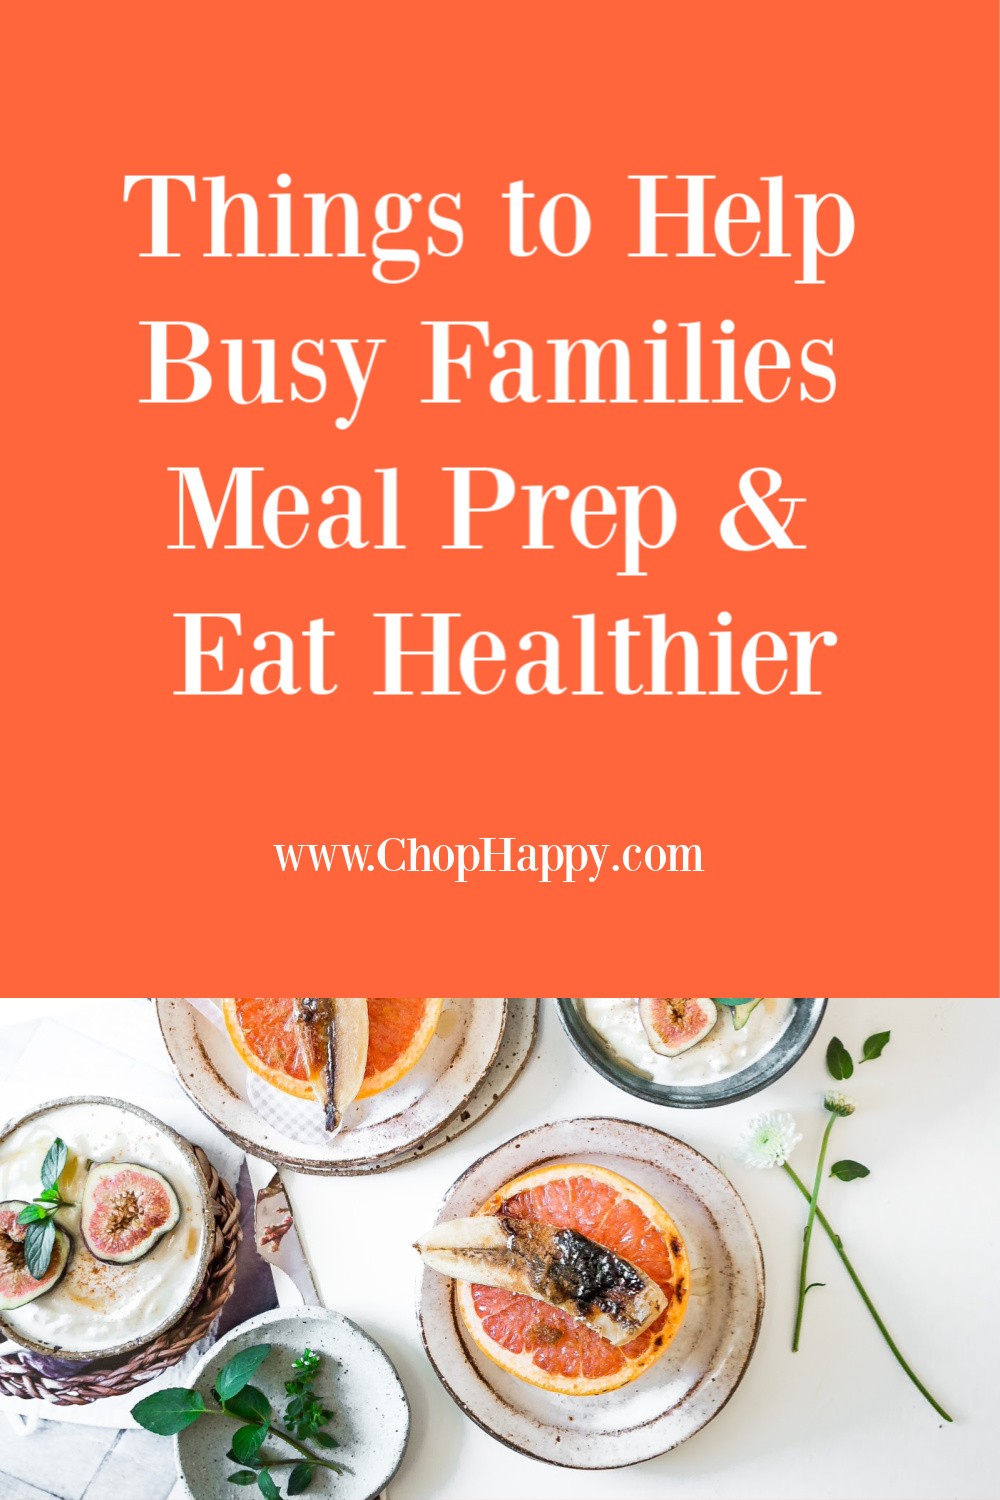 Things to Help Busy Families Meal Prep & Eat Healthier. Meal prep helps families get dinner on the table fast. Here are the top Amazon products to buy for meal prep. Happy Cooking! www.ChopHappy.com #mealprep #eathealthier